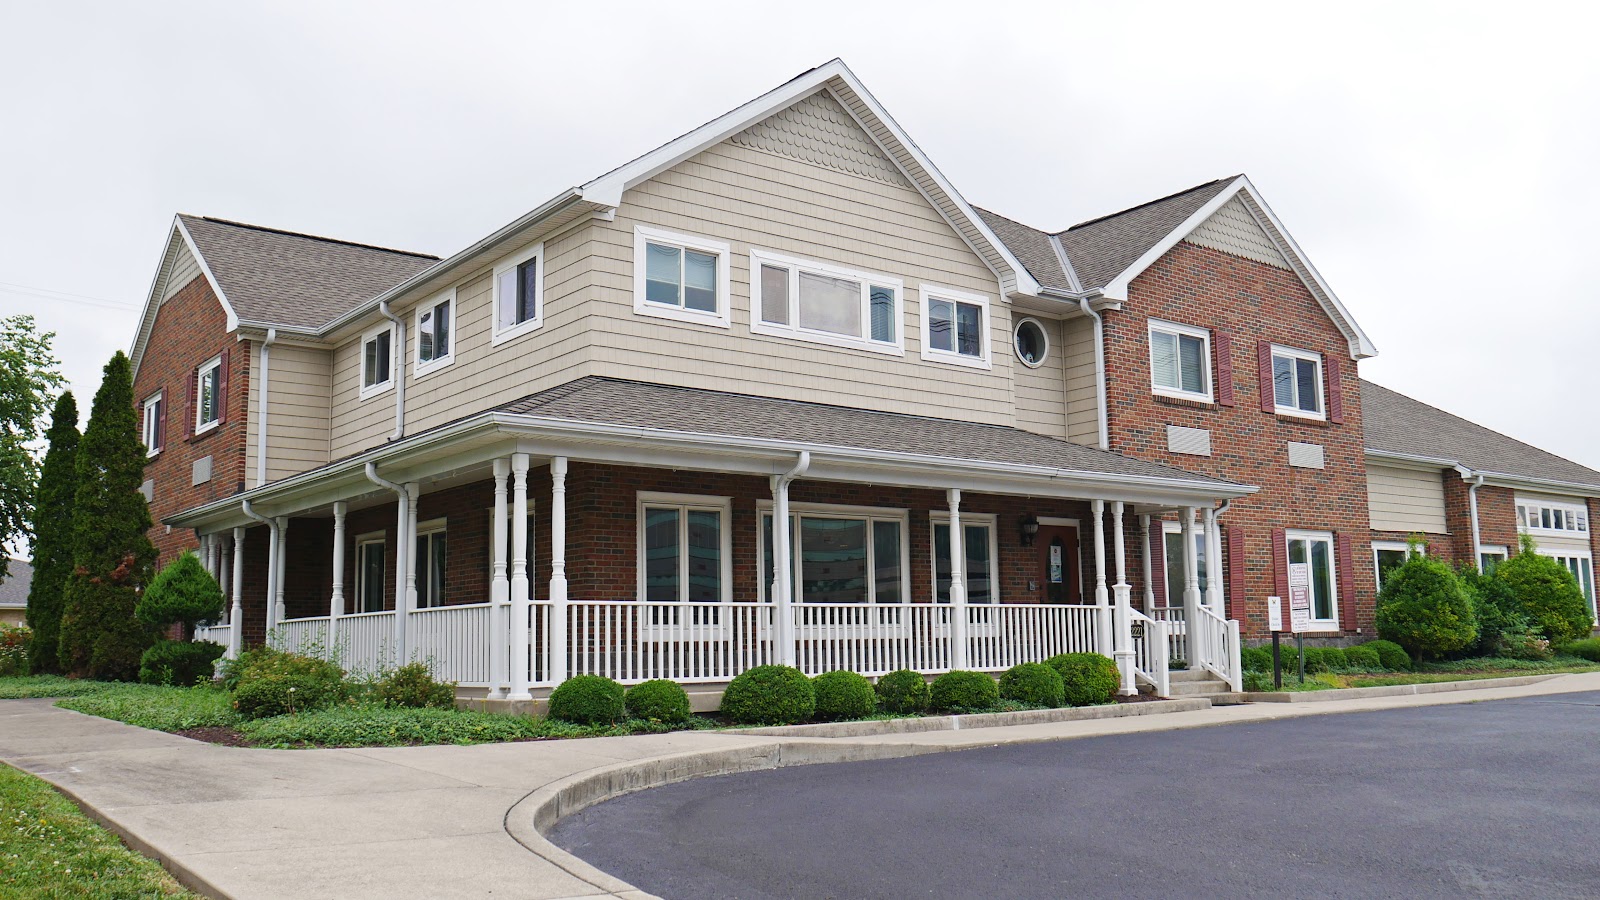 Addiction Recovery Centers (ARC) - Karens Place Maternity Center